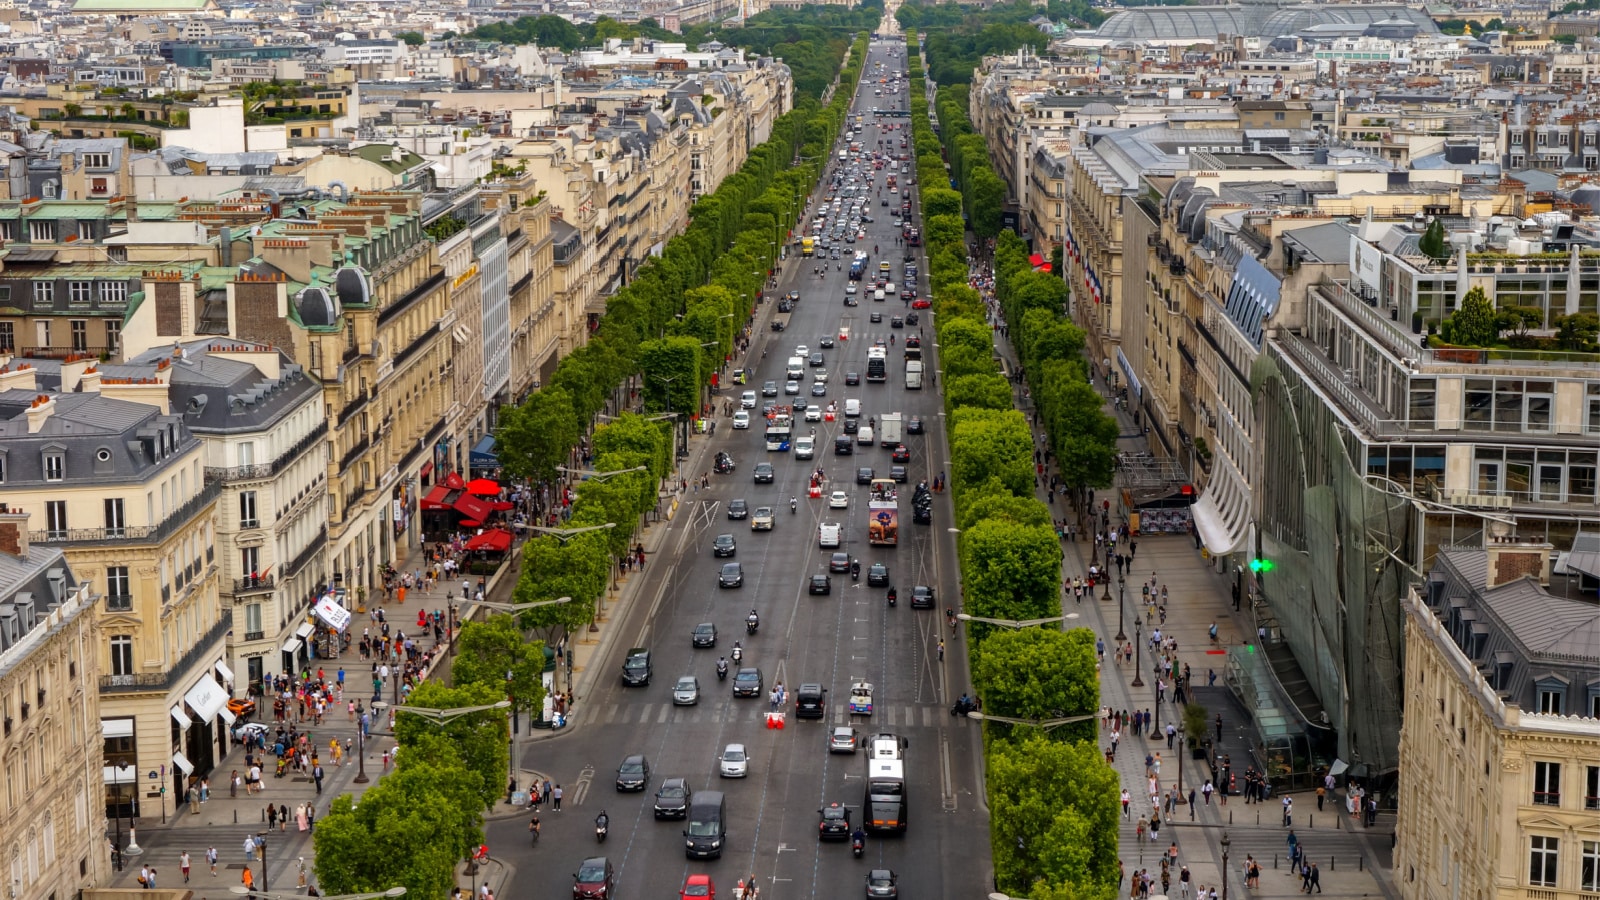 Paris, France - July 2019 - Panoramic bird's eye view above Haussmann-style townhouses on the trimmed tree-lined Avenue des Champs-Elysées, heading to Place de la Concorde and Tuileries Garden